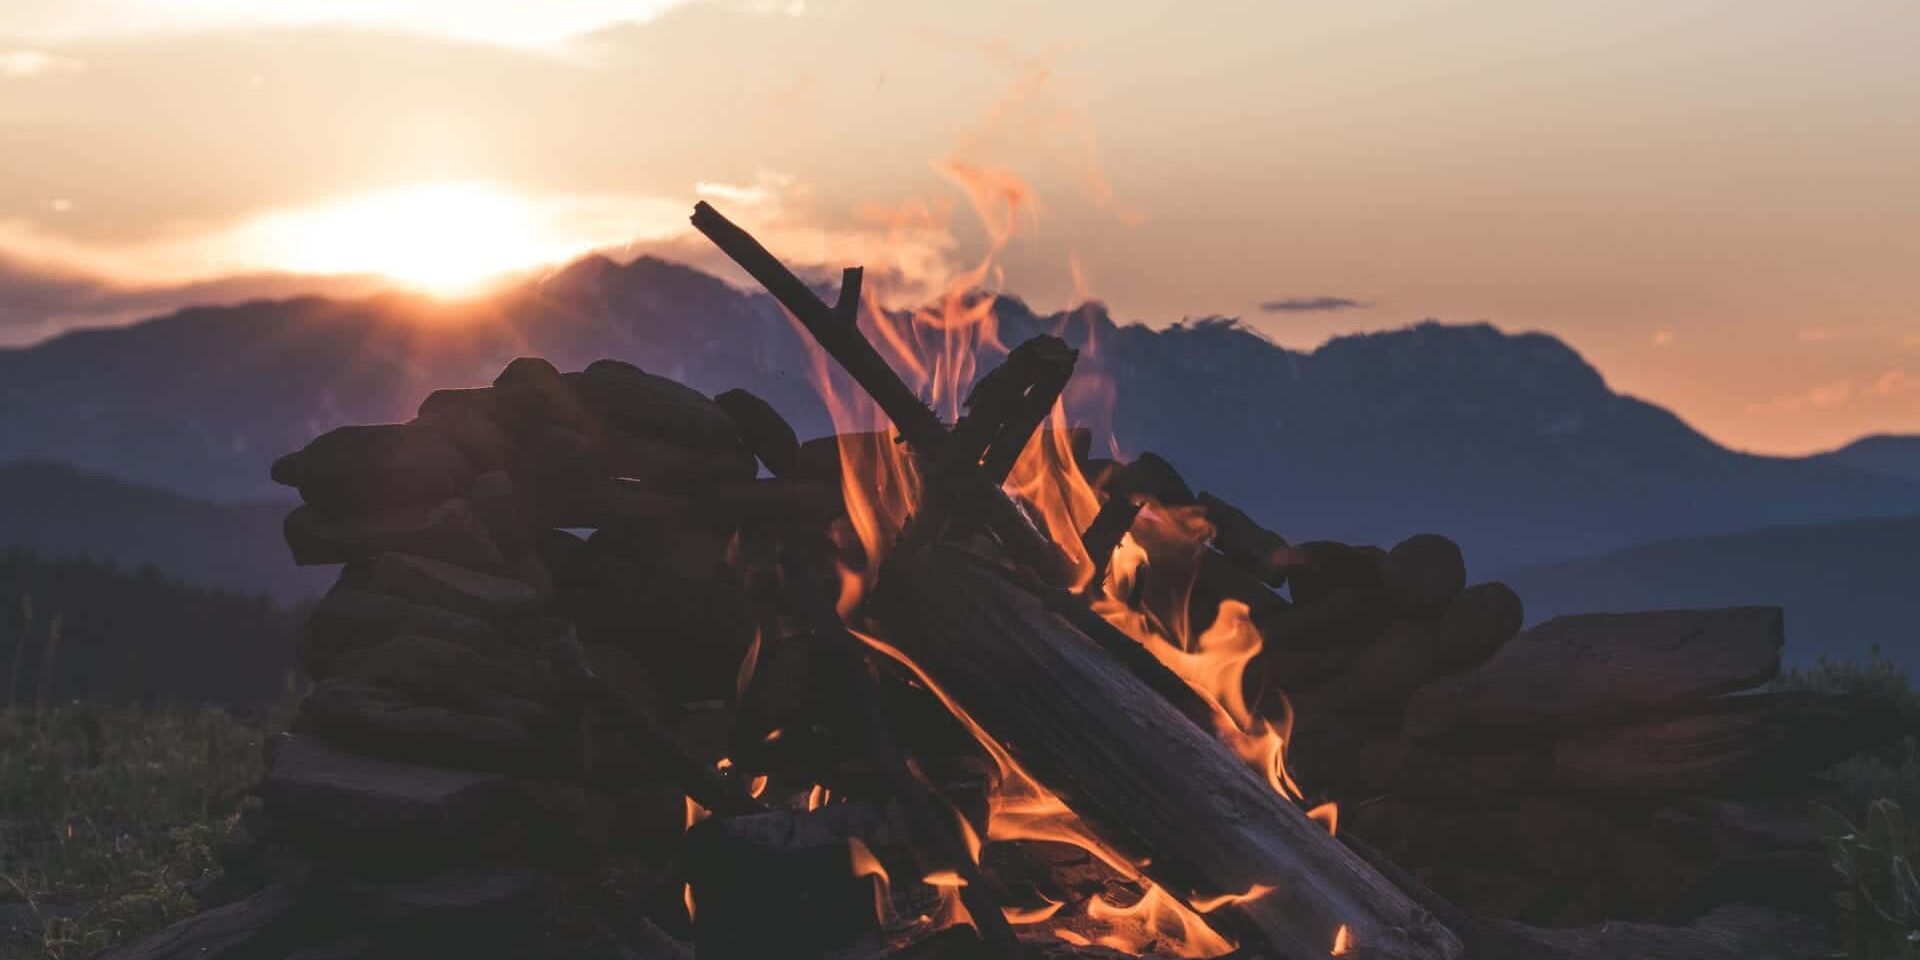 fire mountain colter-olmstead-714900-unsplash